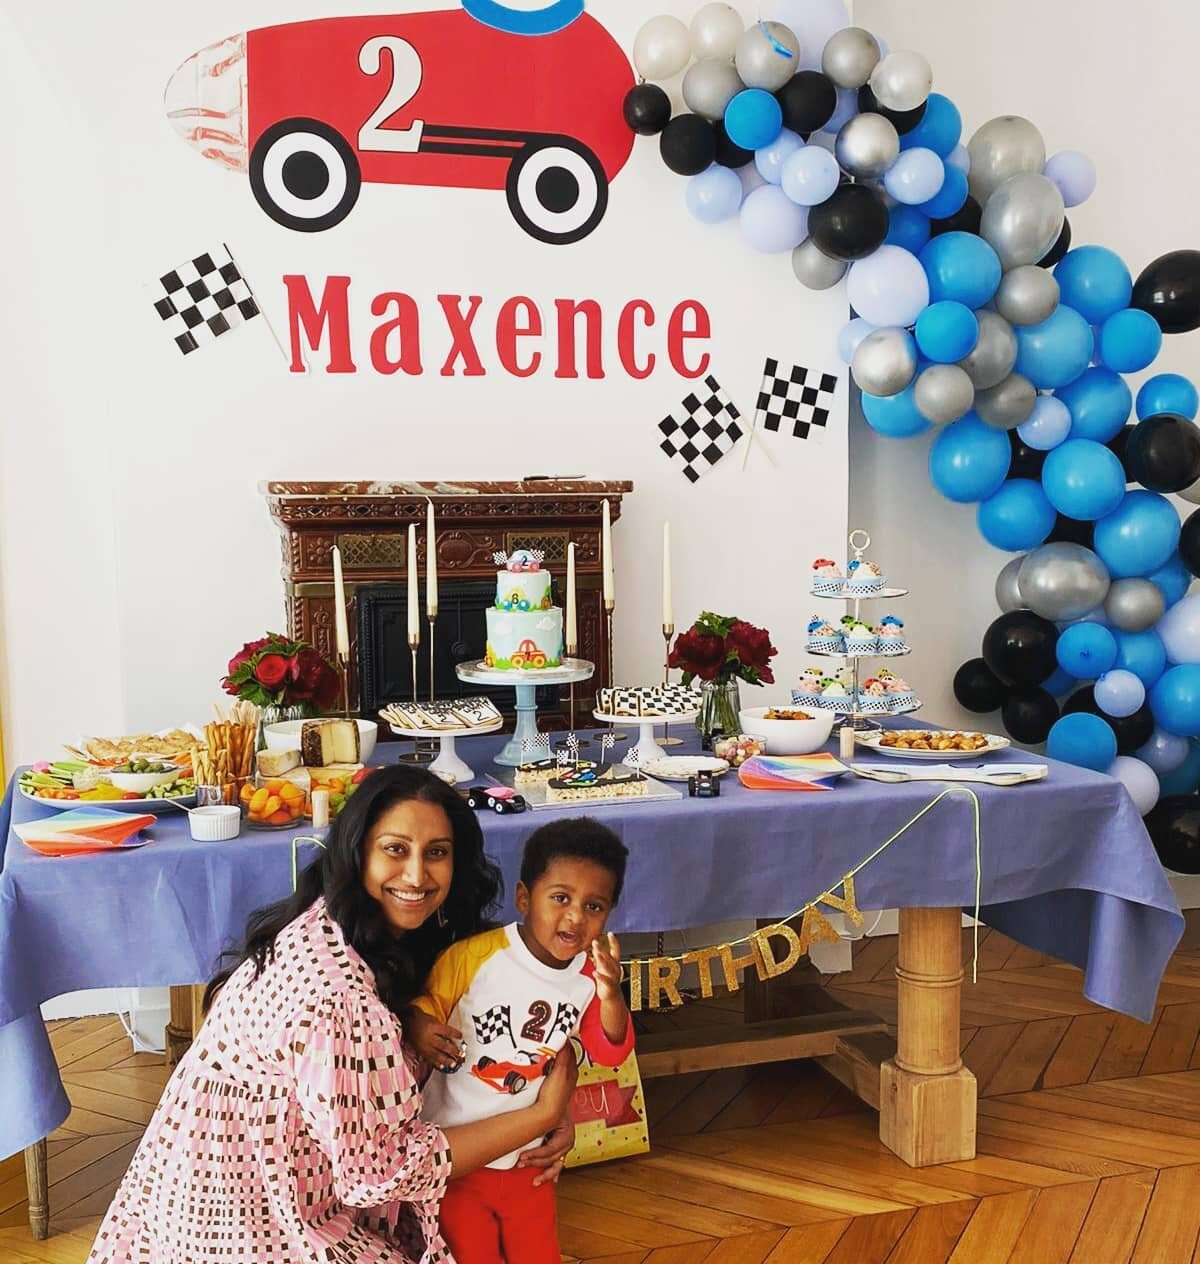 And just like that he's 2! Bon Anniversaire Maxence!